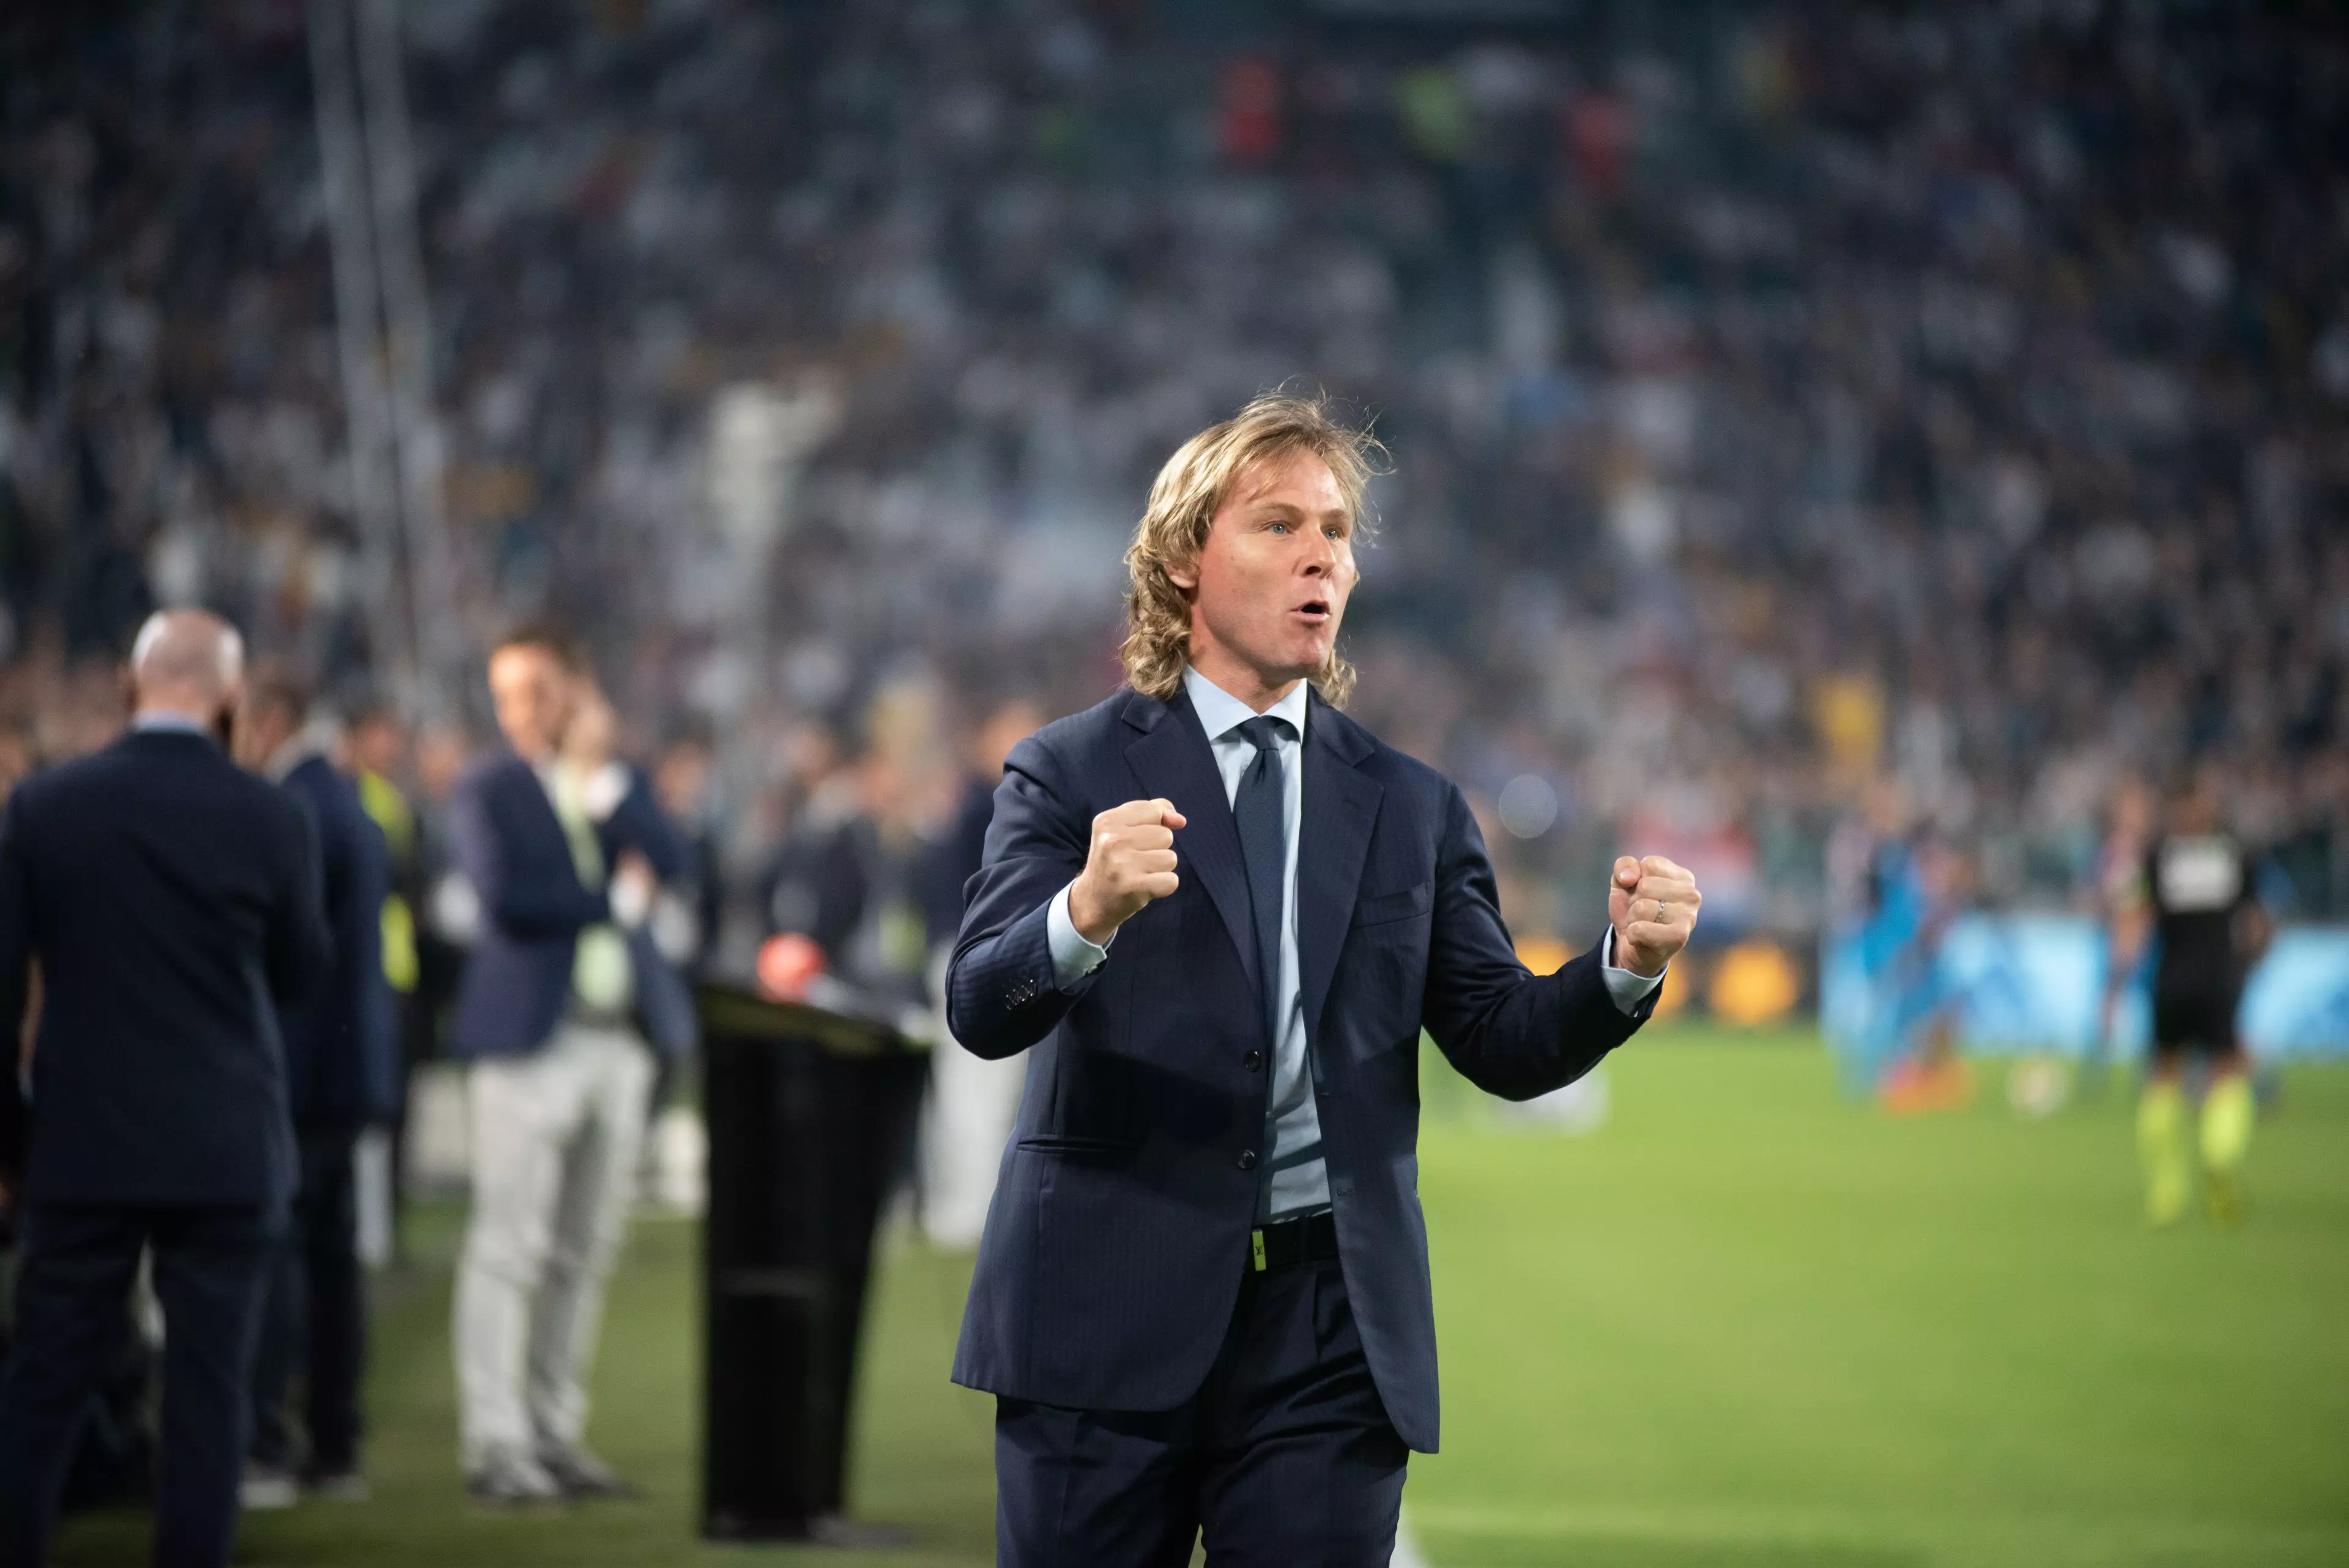 Nedved already has the consultancy role at the Allianz Stadium. Image: PA Images